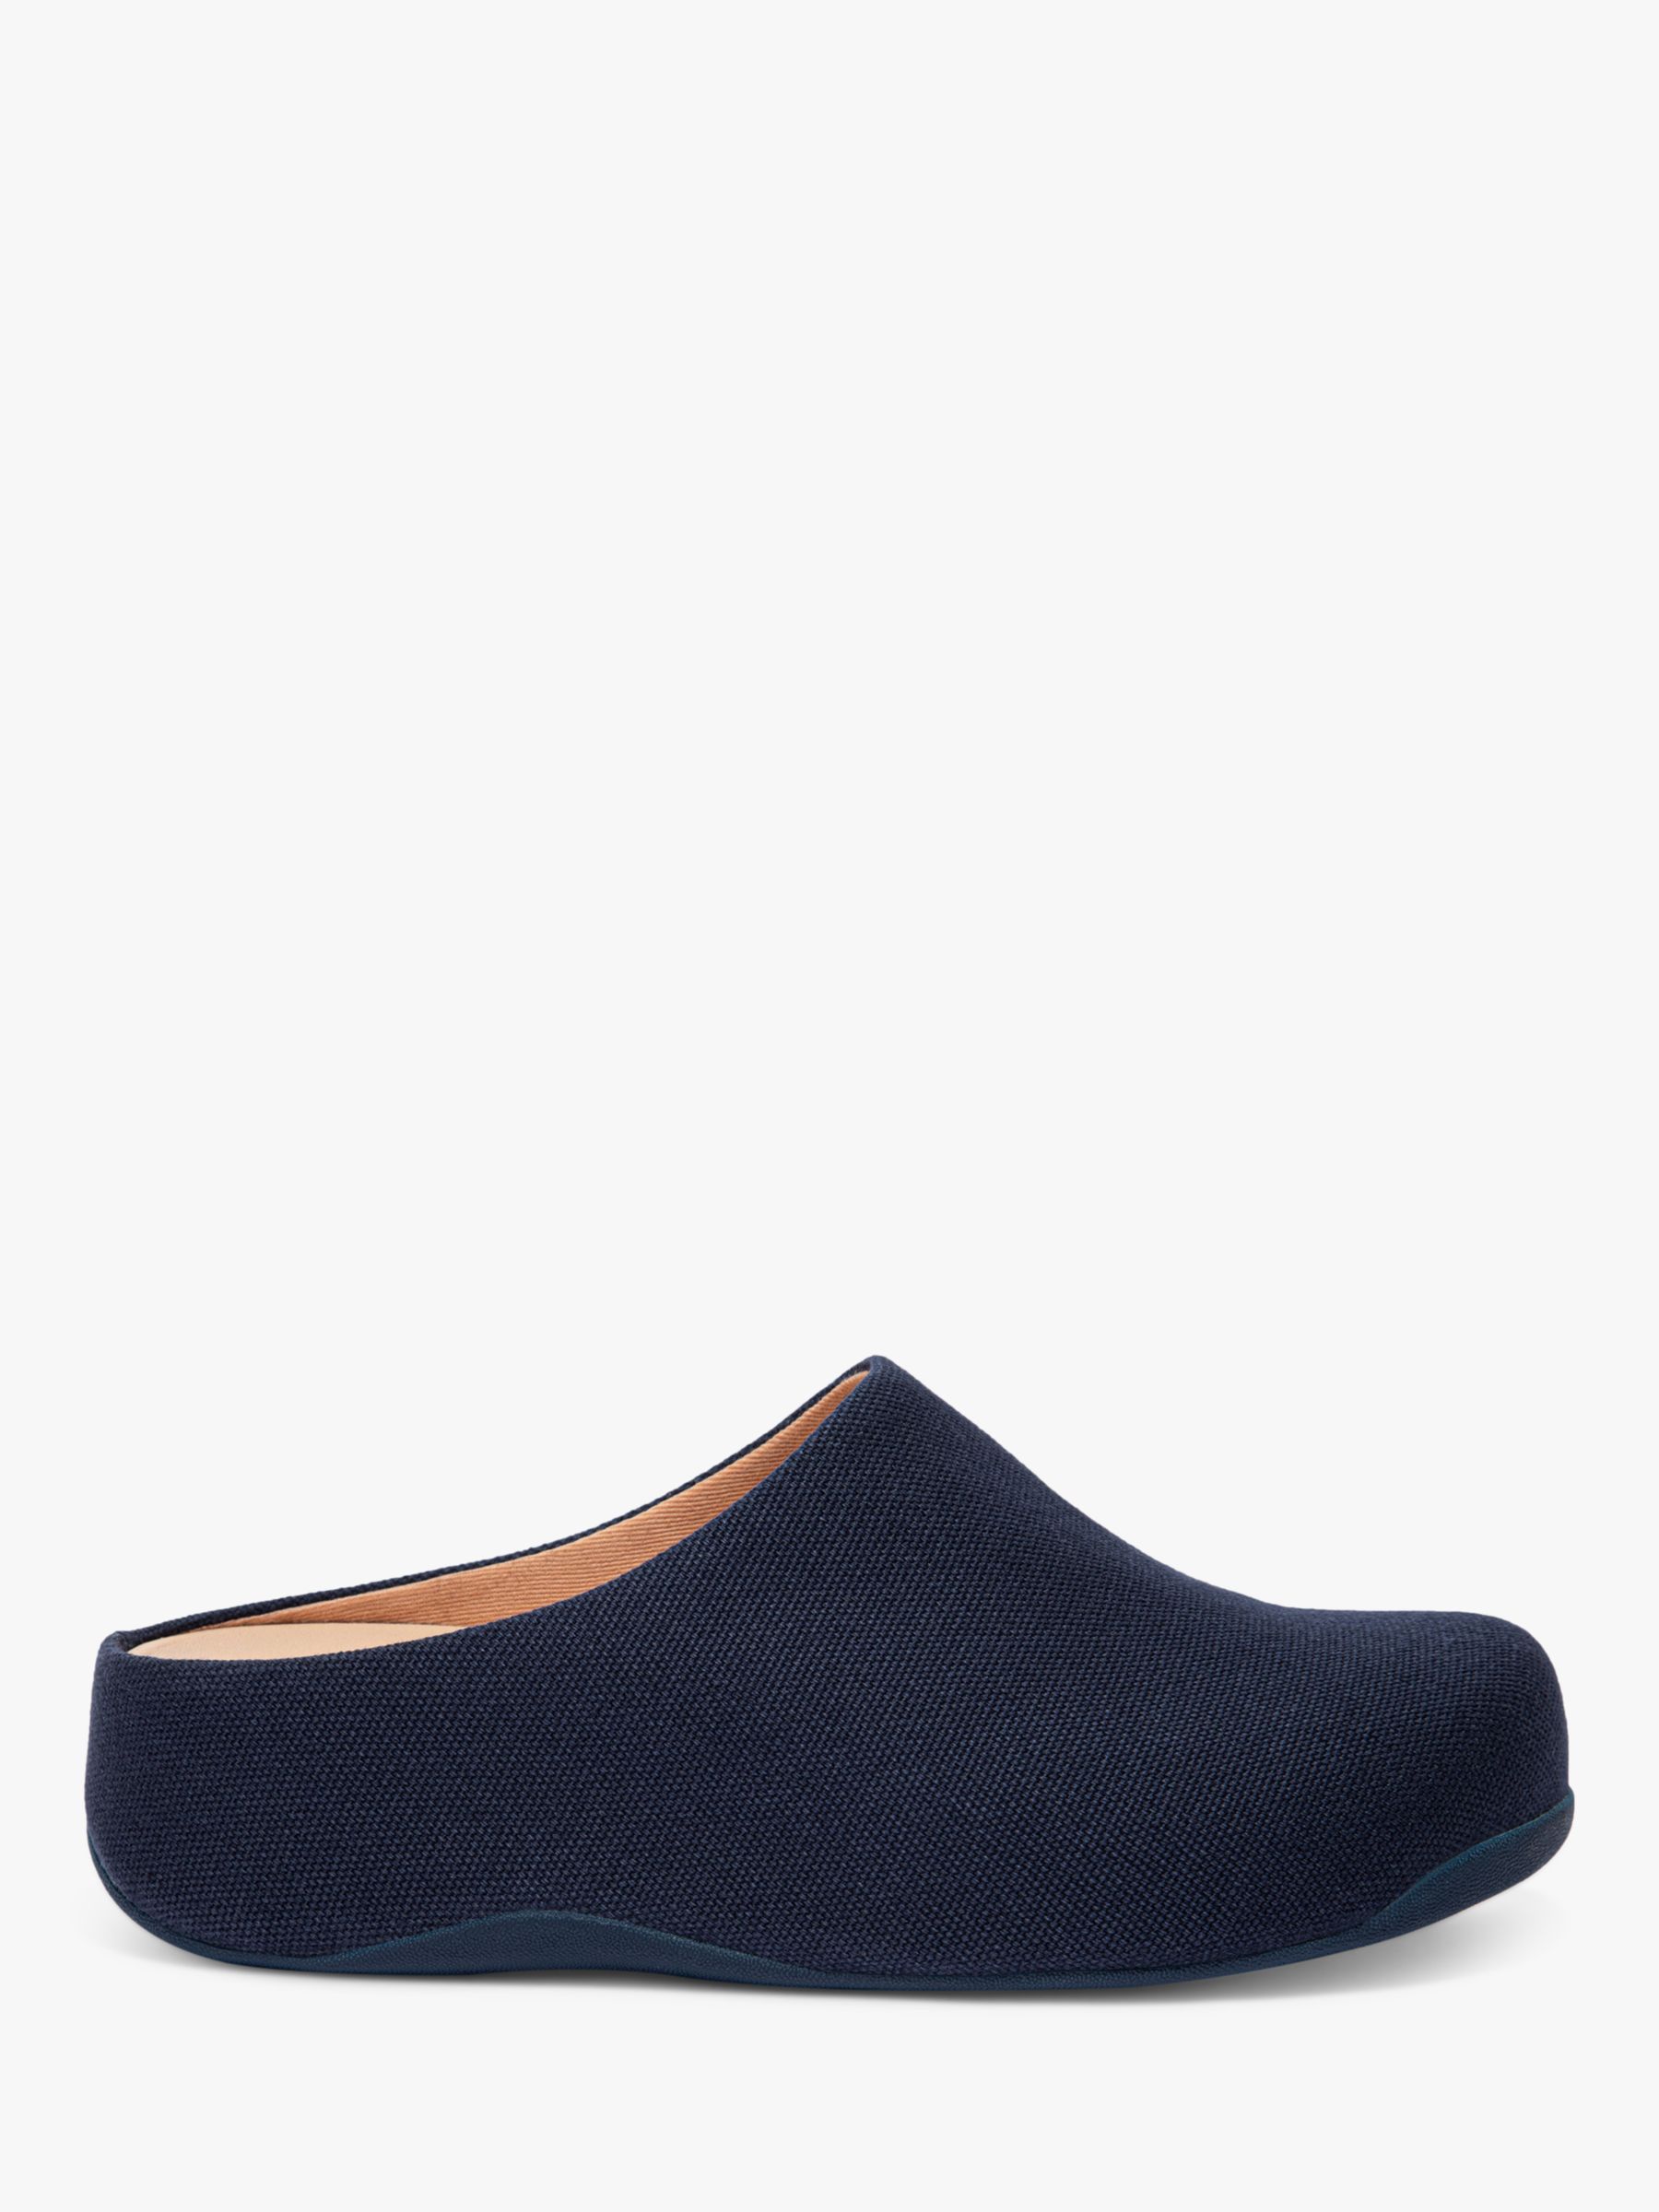 FitFlop Shuv Canvas Clogs, Midnight Navy at John Lewis & Partners